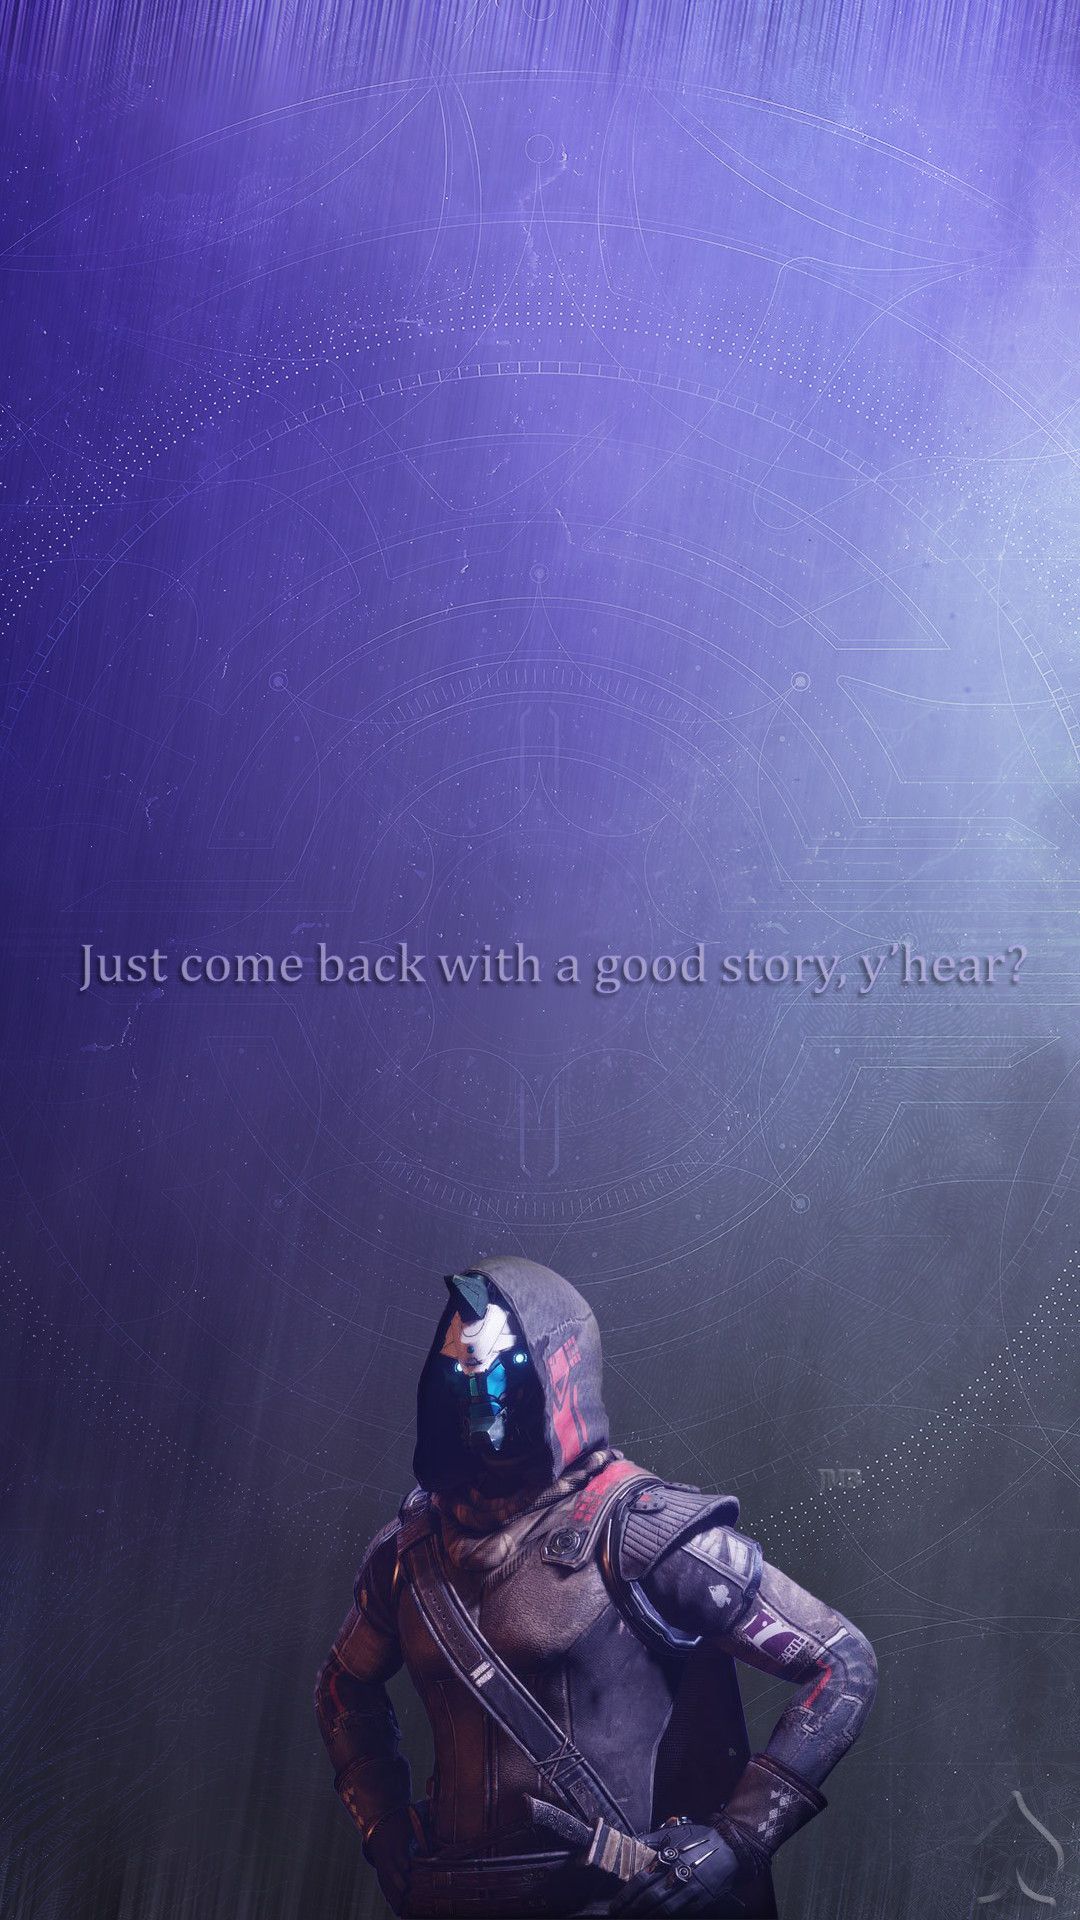 Made this for an iPhone Wallpaper  rdestiny2